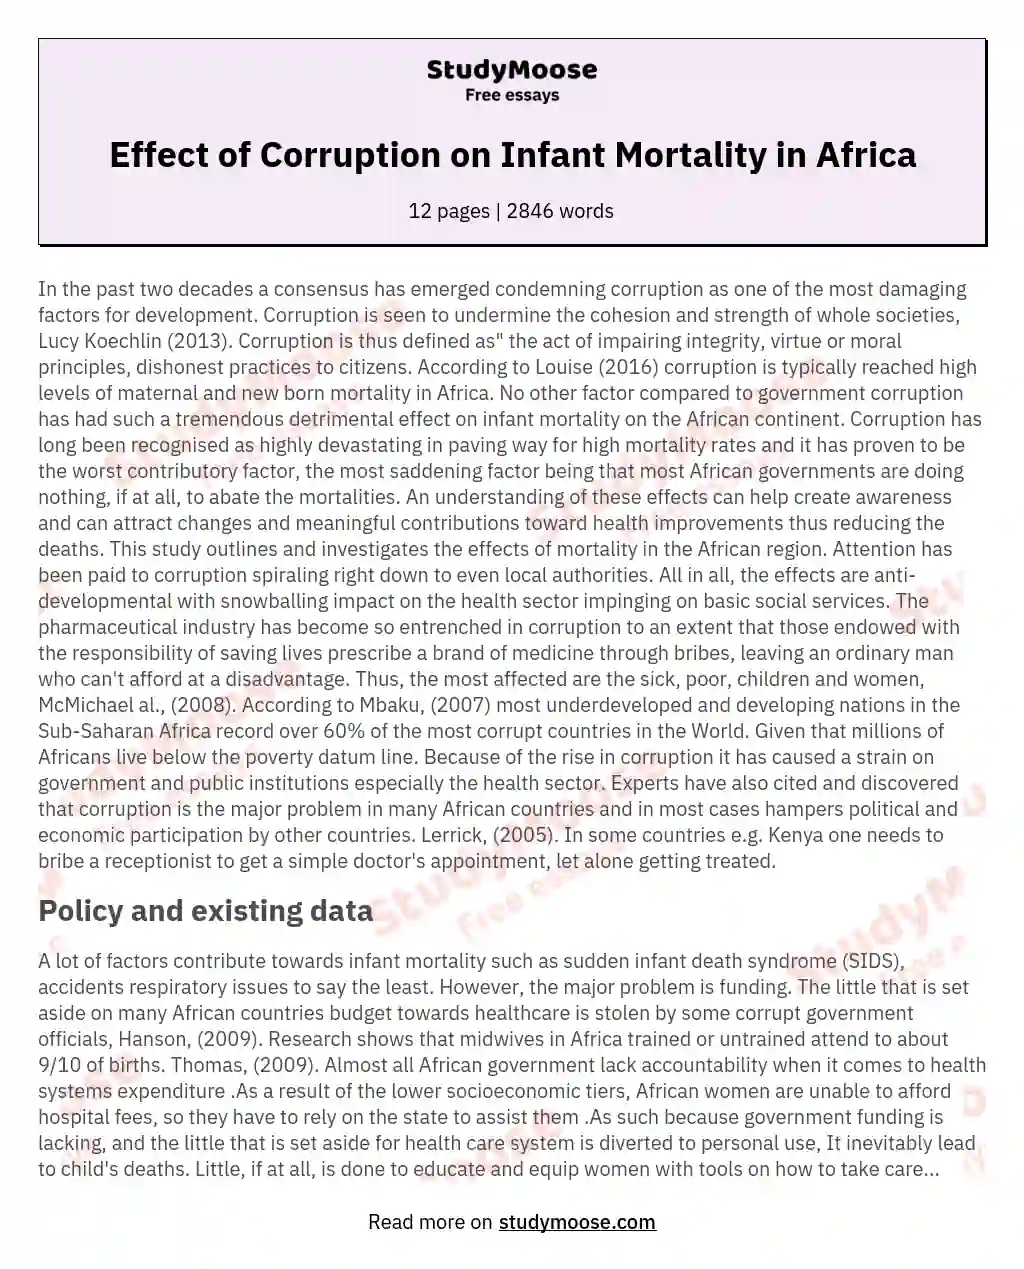 Effect of Corruption on Infant Mortality in Africa essay